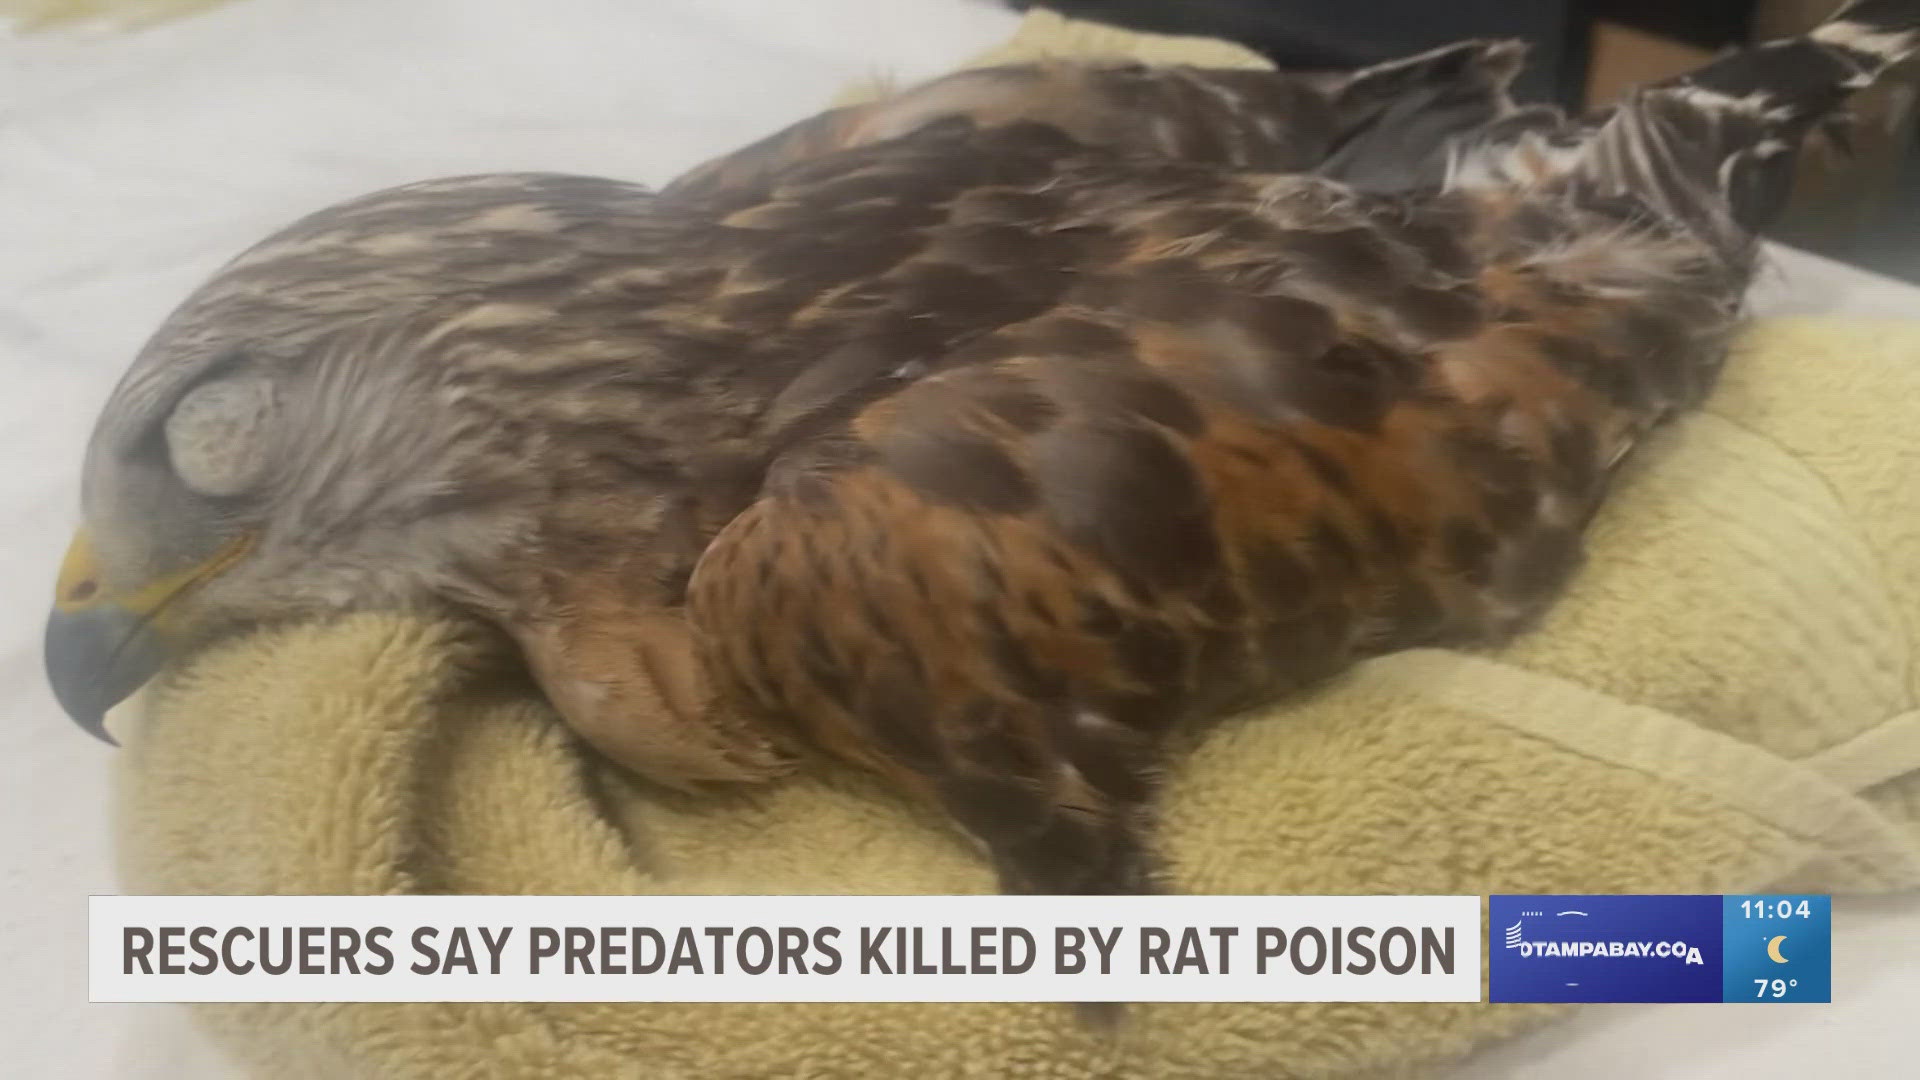 A family of hawks died this past week in Sarasota from what rescuers believe is rat poison exposure.